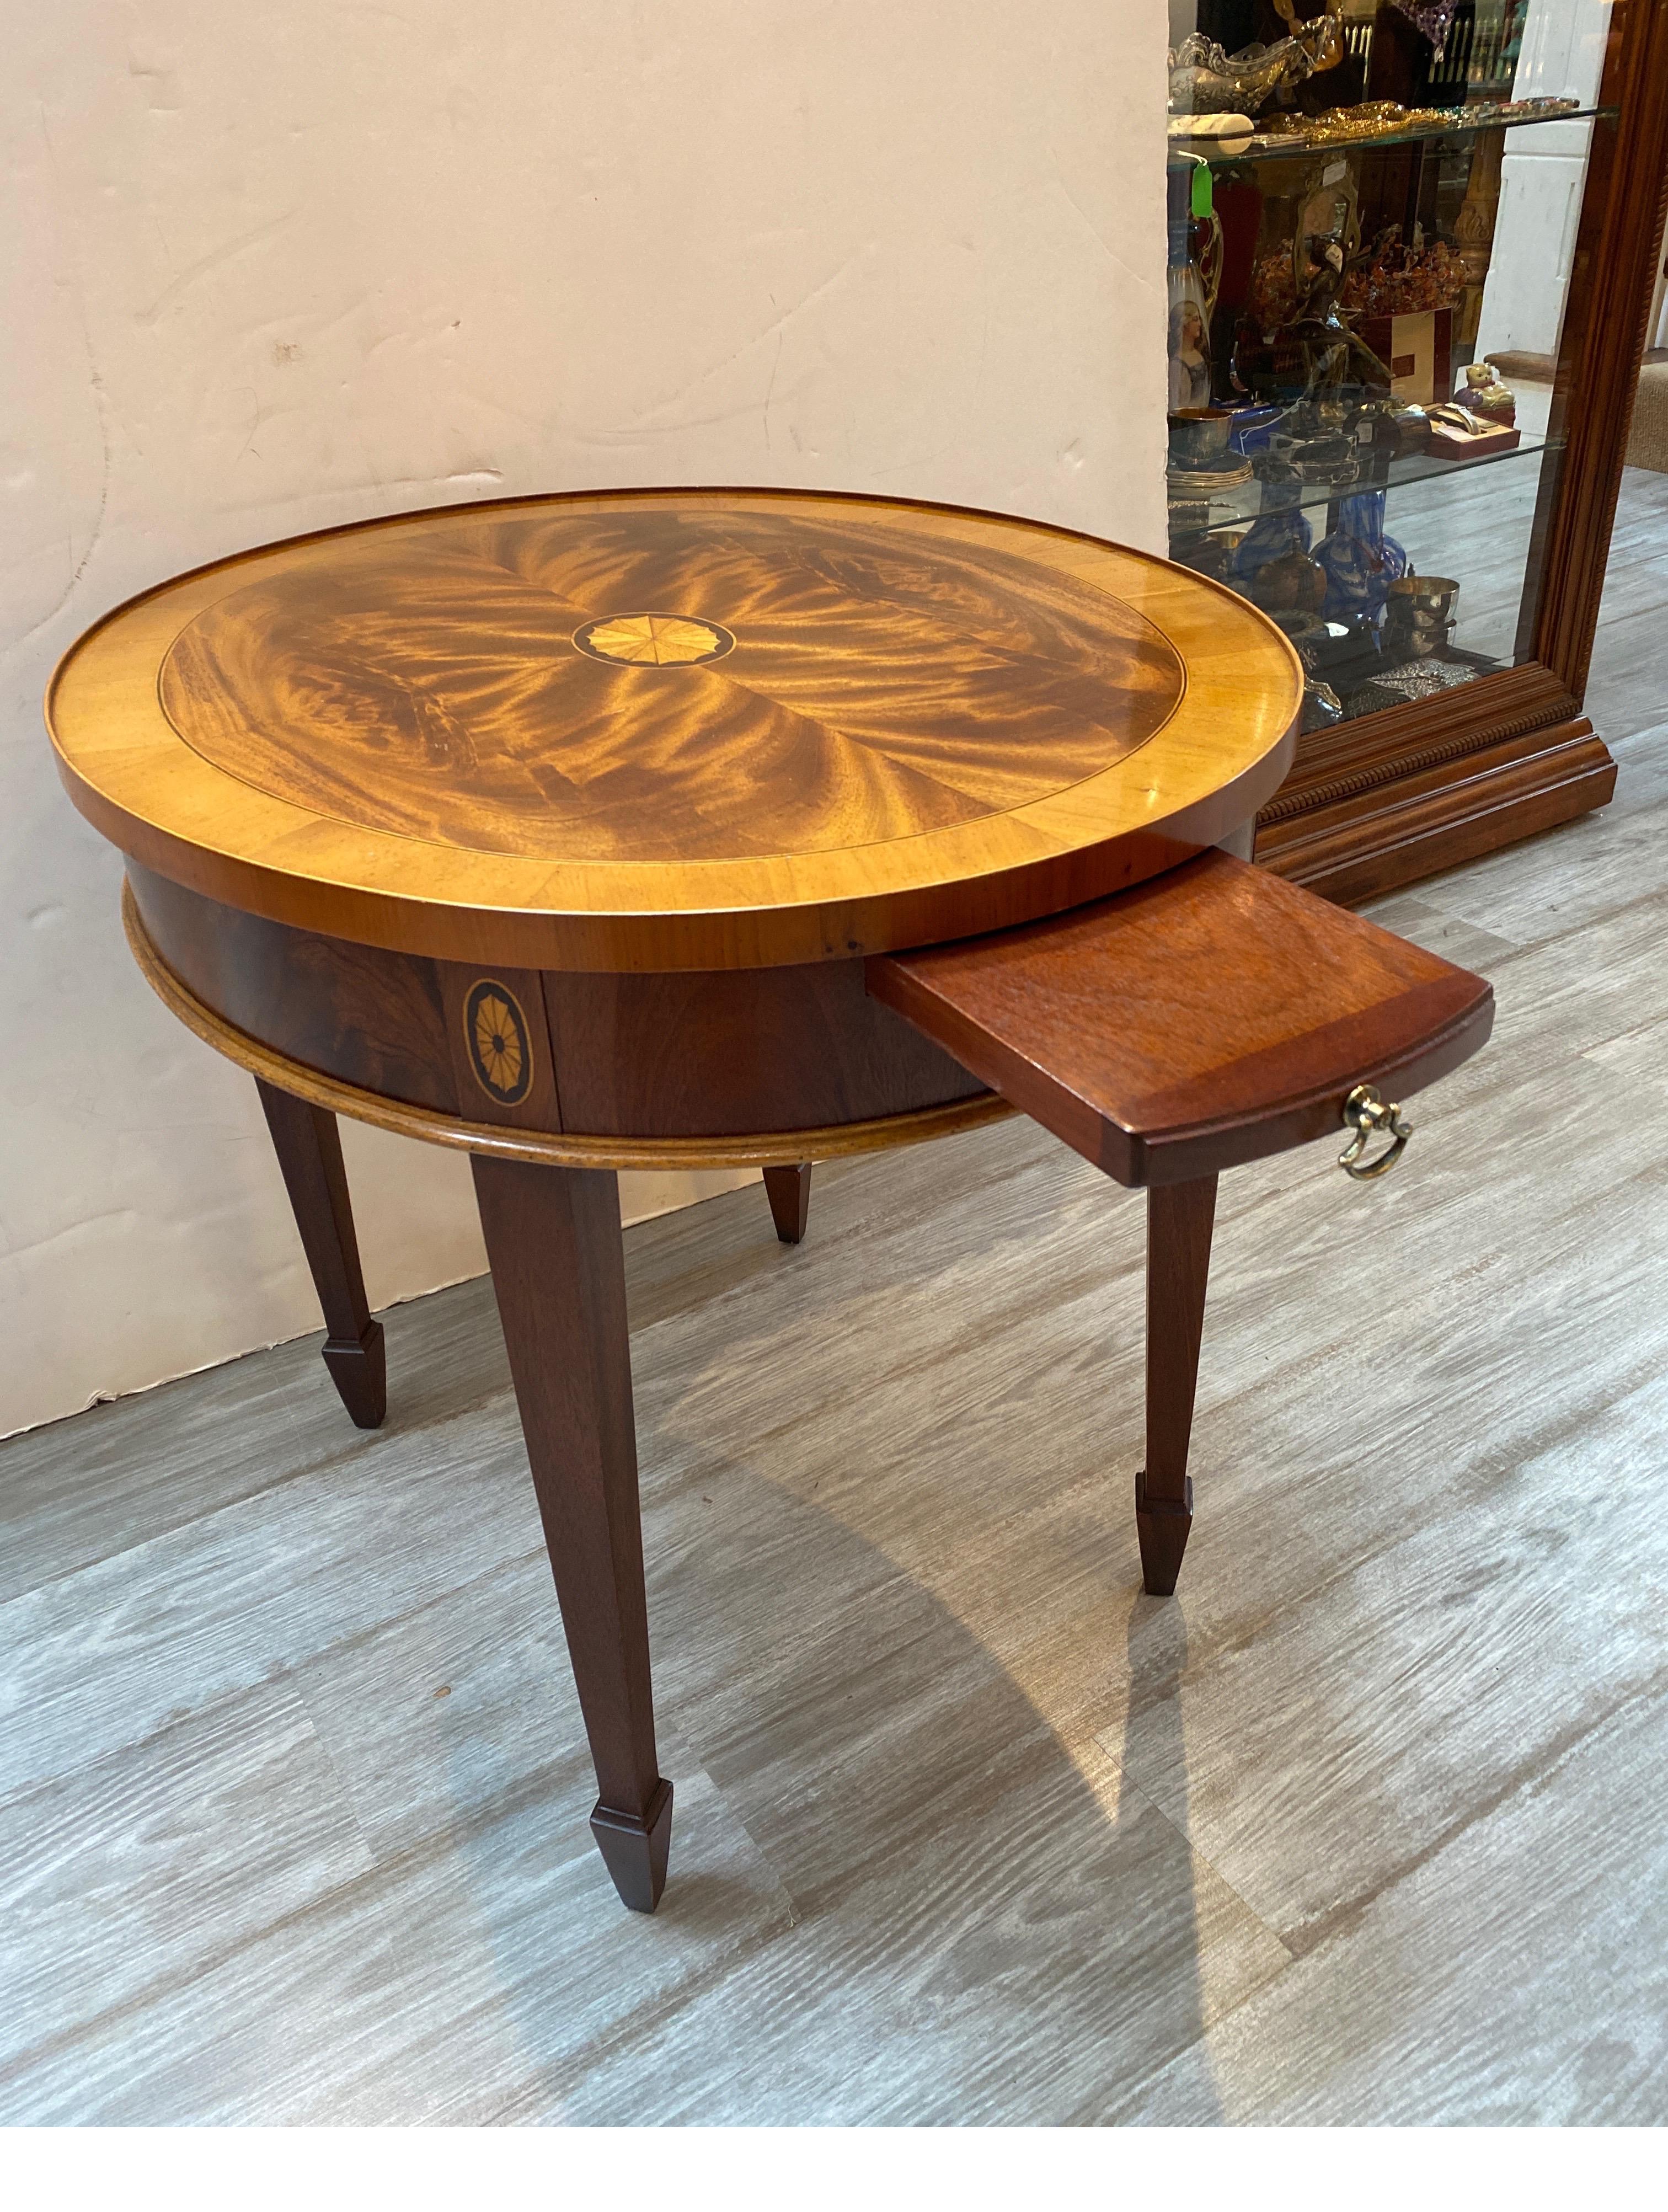 20th Century Flame Mahogany and Satinwood Inlaid Hepplewhite Style Table